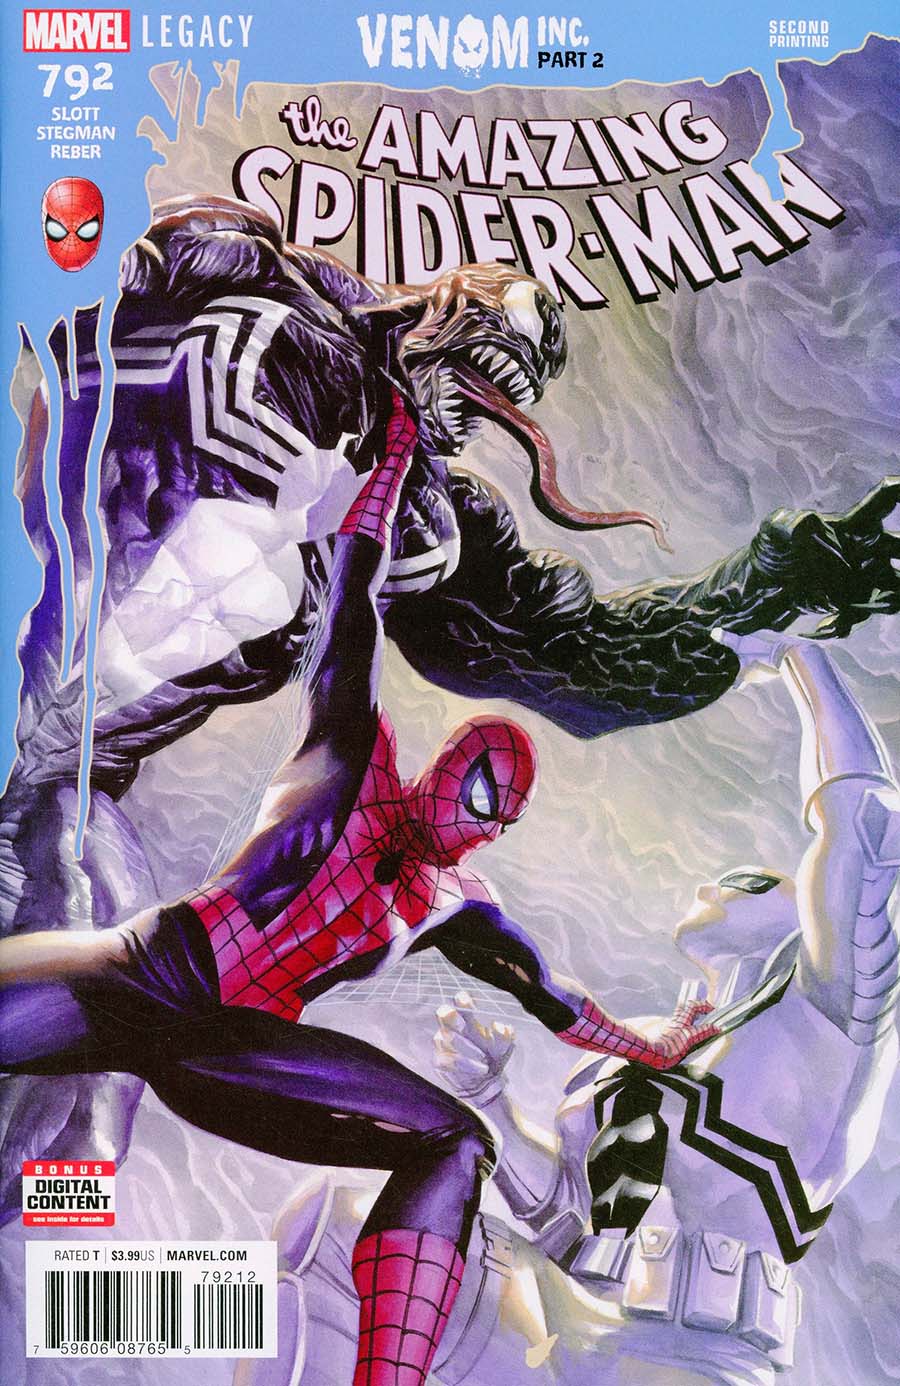 Amazing Spider-Man Vol 4 #792 Cover D 2nd Ptg Variant Alex Ross Cover (Marvel Legacy Tie-In)